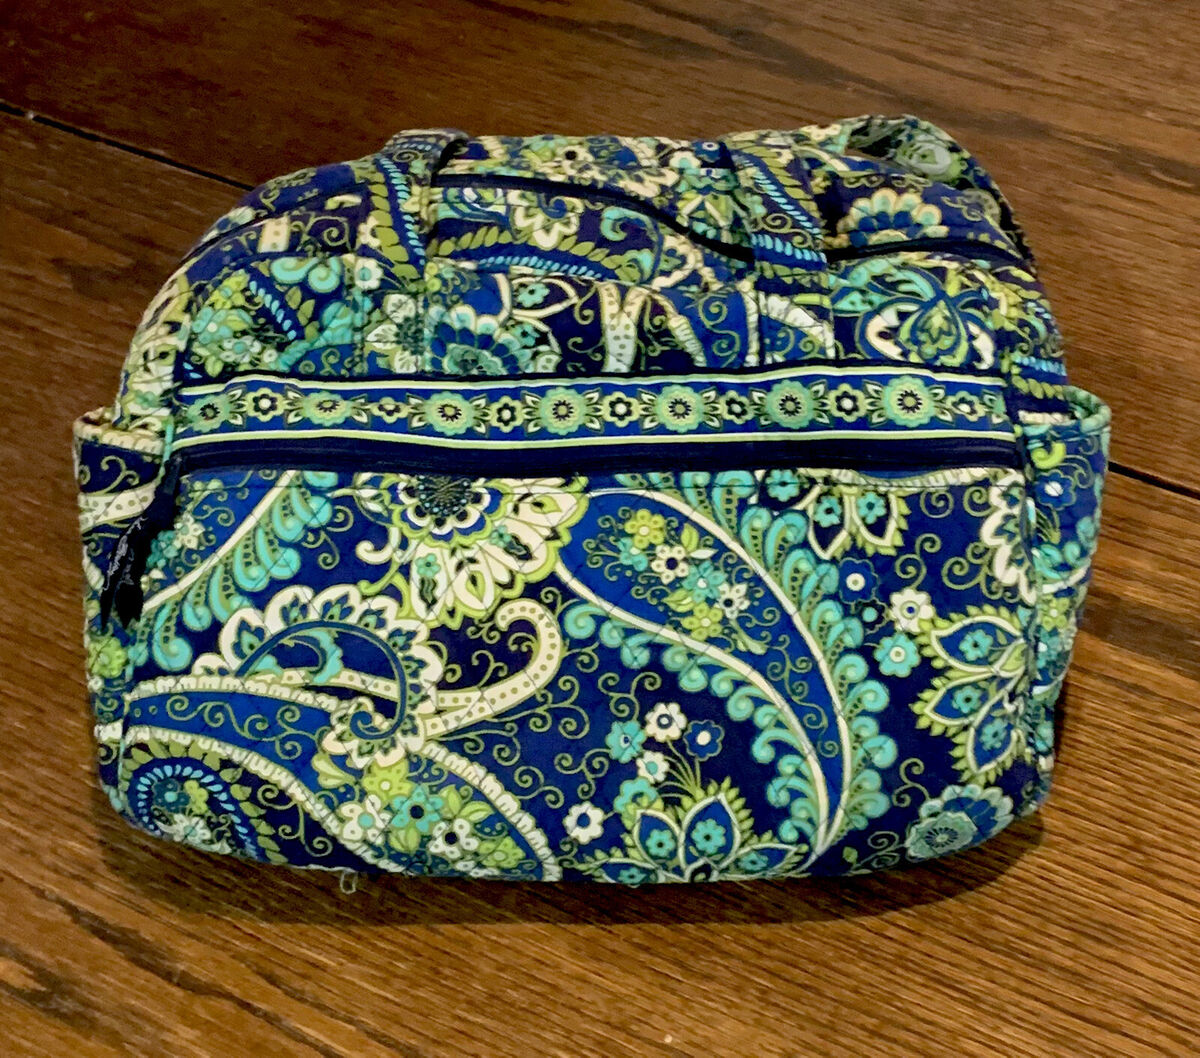 VERA BRADLEY Diaper Bag Blue Rhapsody Paisley Floral Quilted